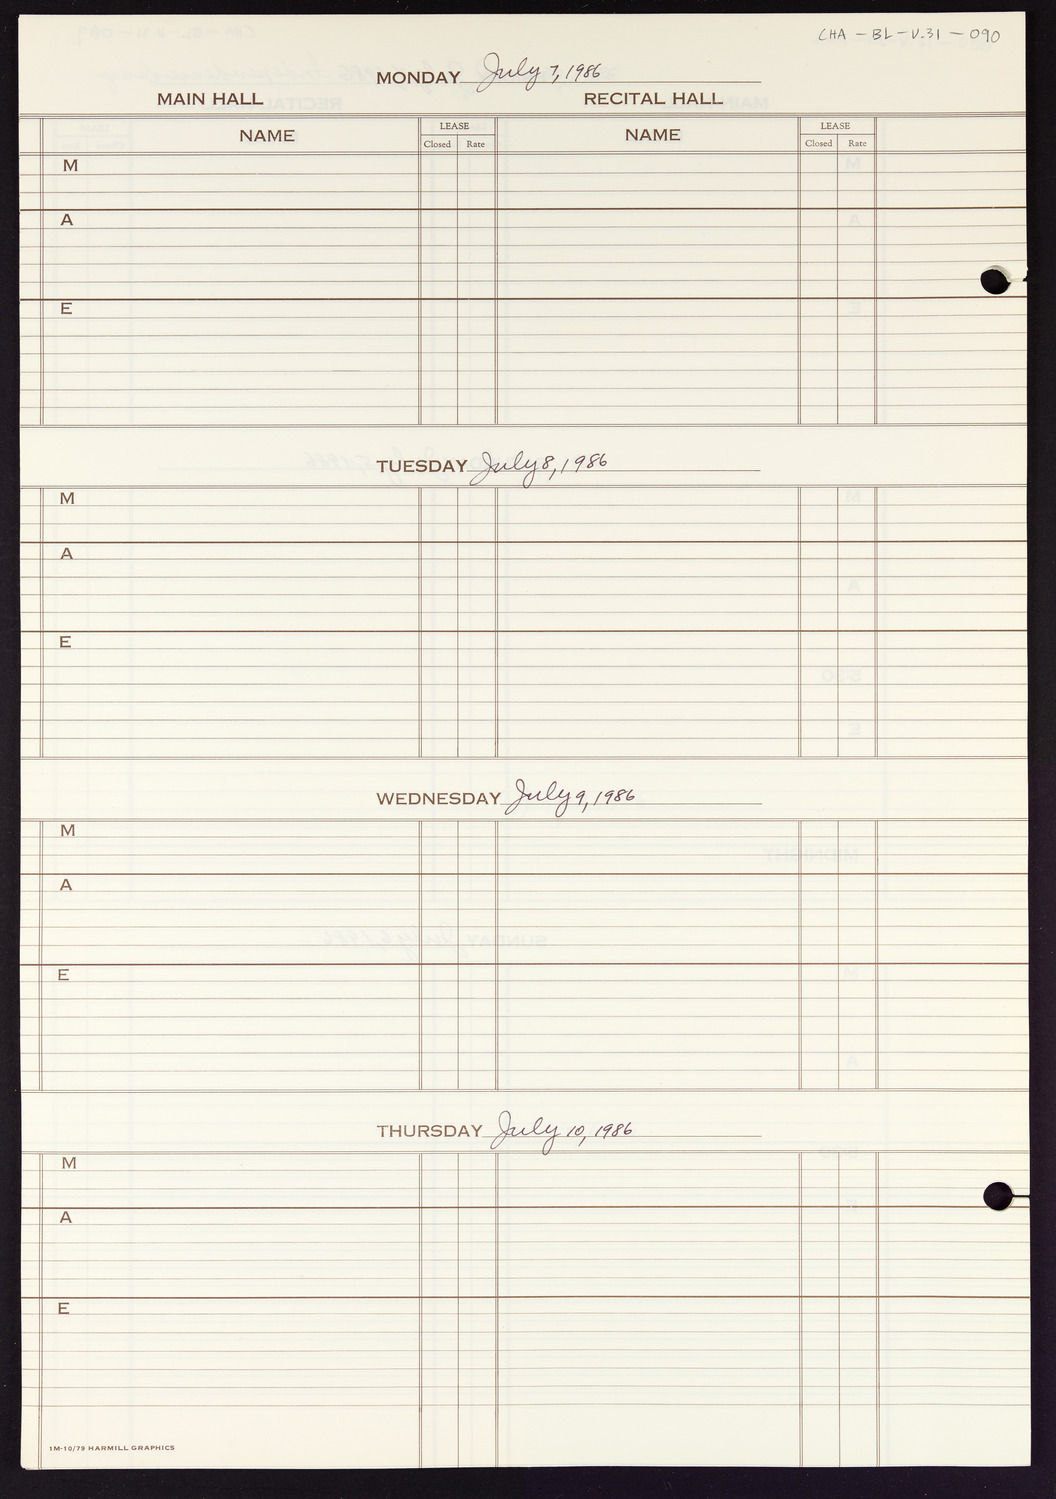 Carnegie Hall Booking Ledger, volume 31, page 90